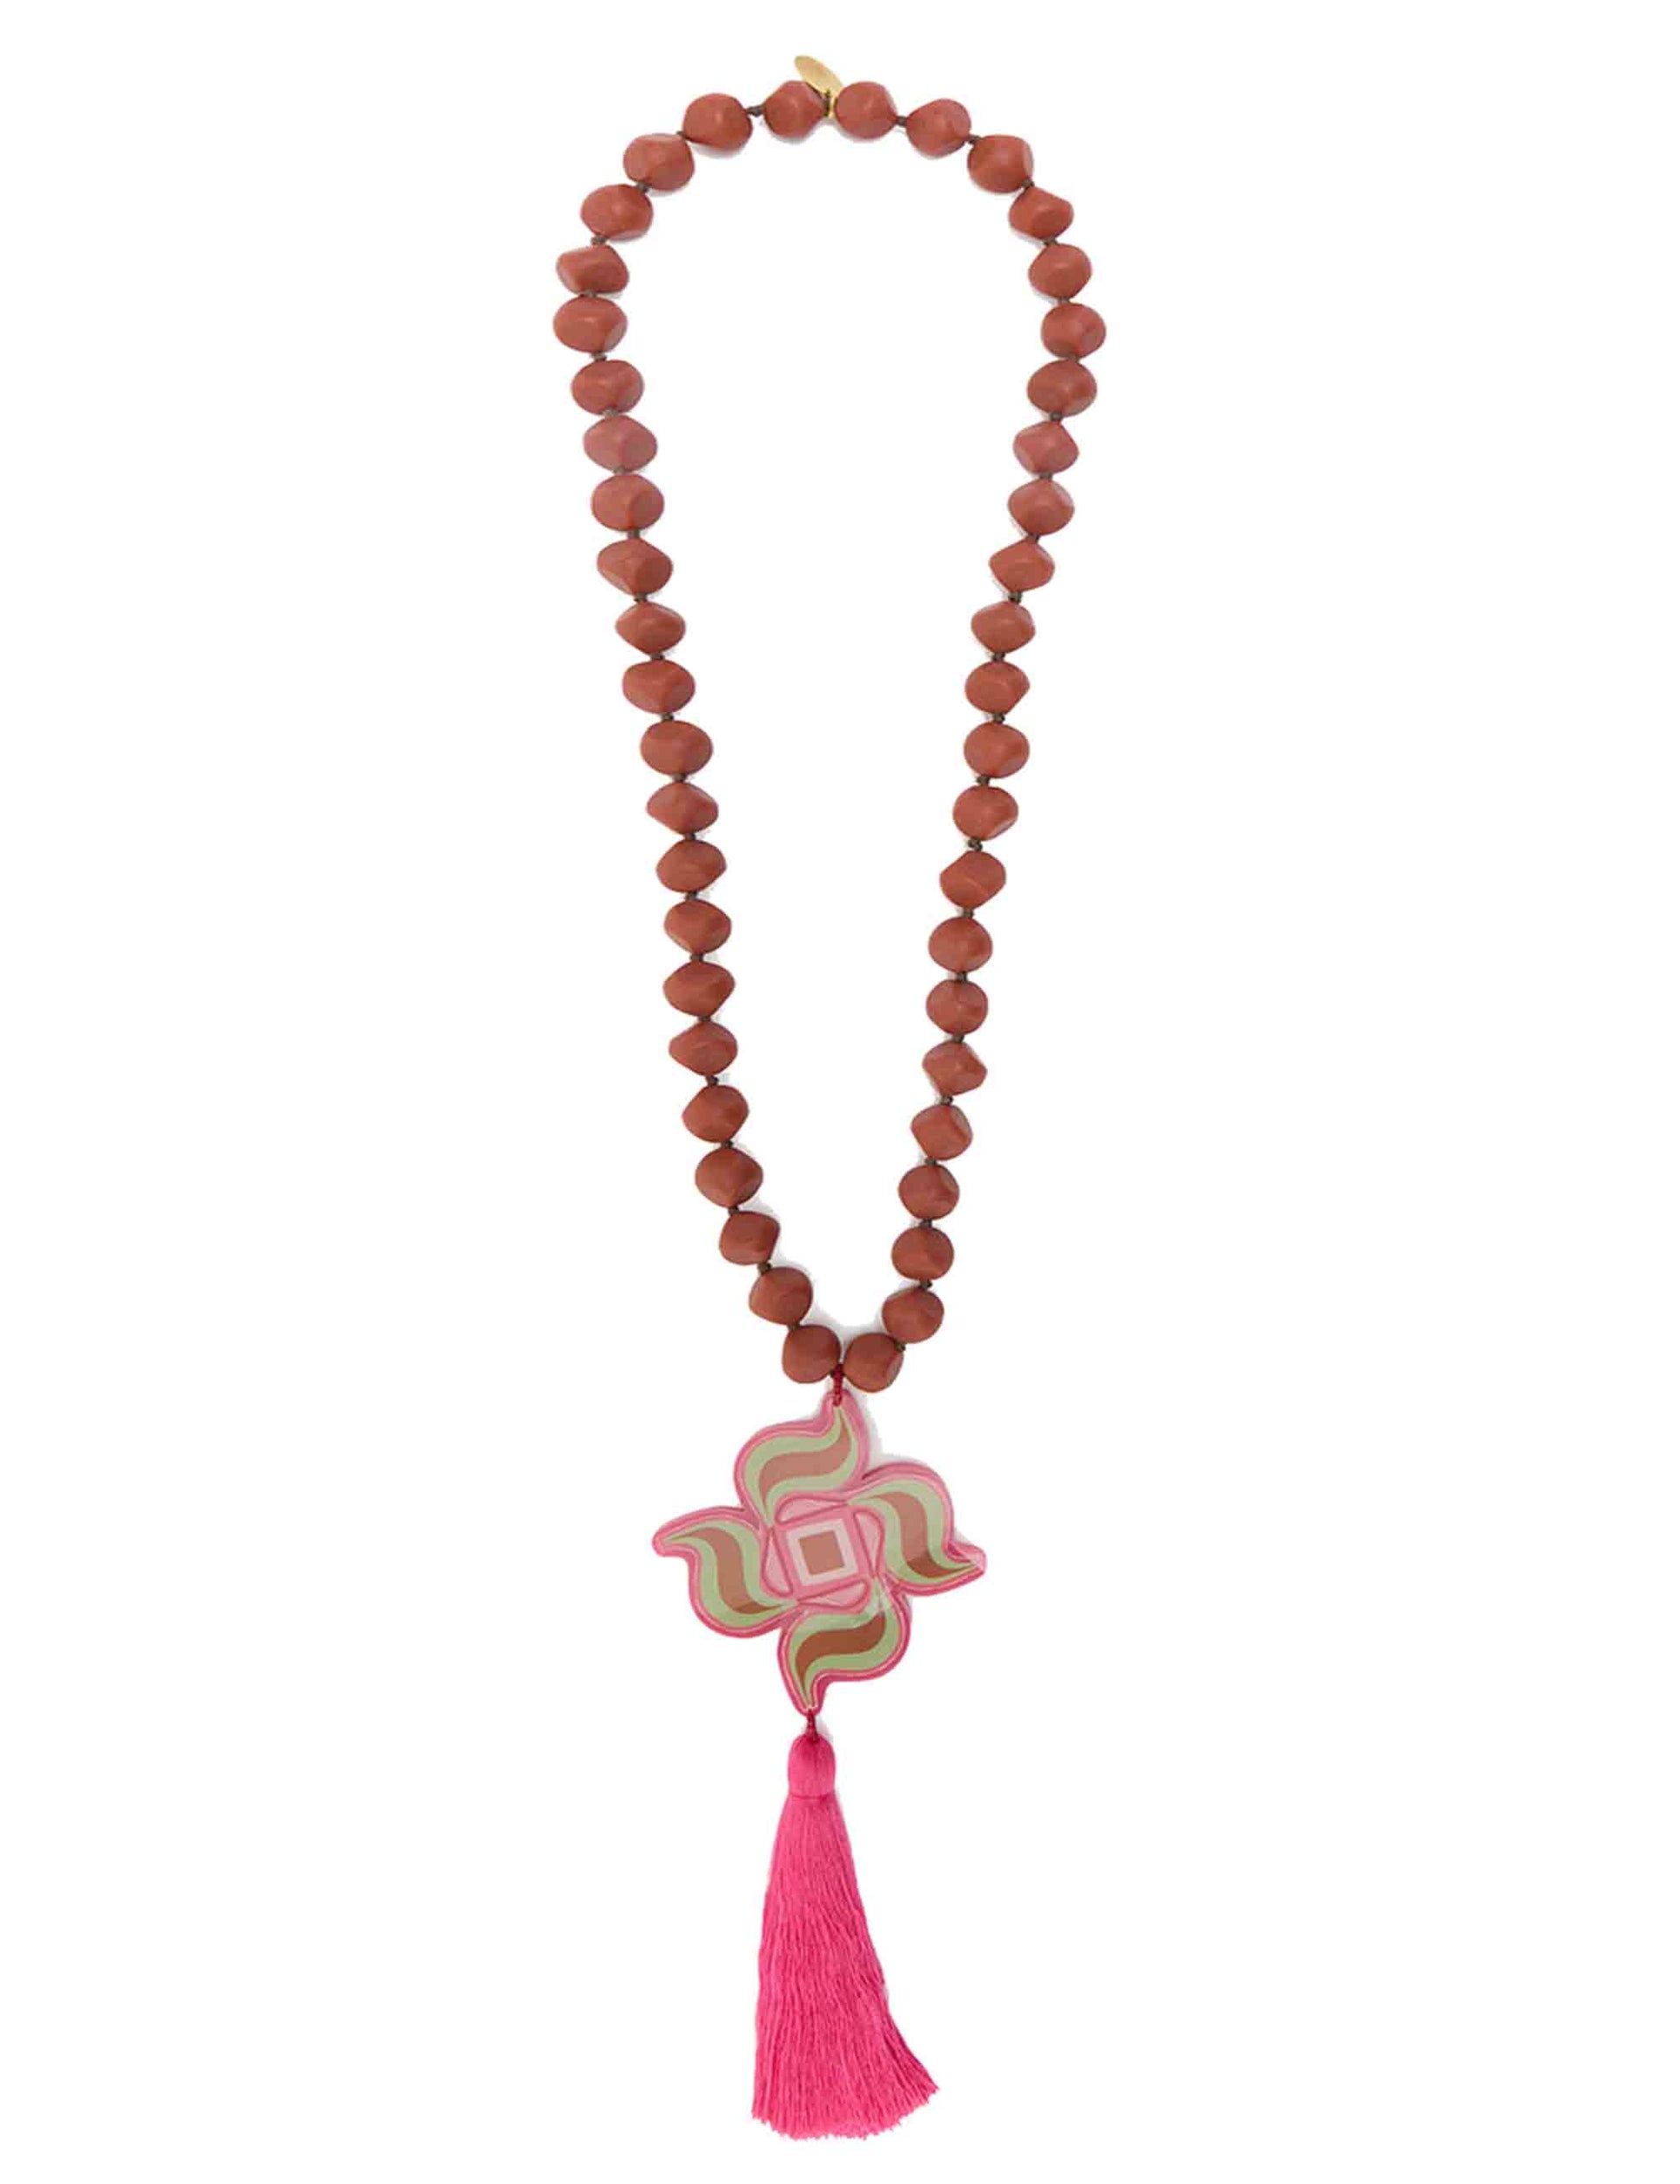 Women's necklaces Pinwheel in pink resin with pendant